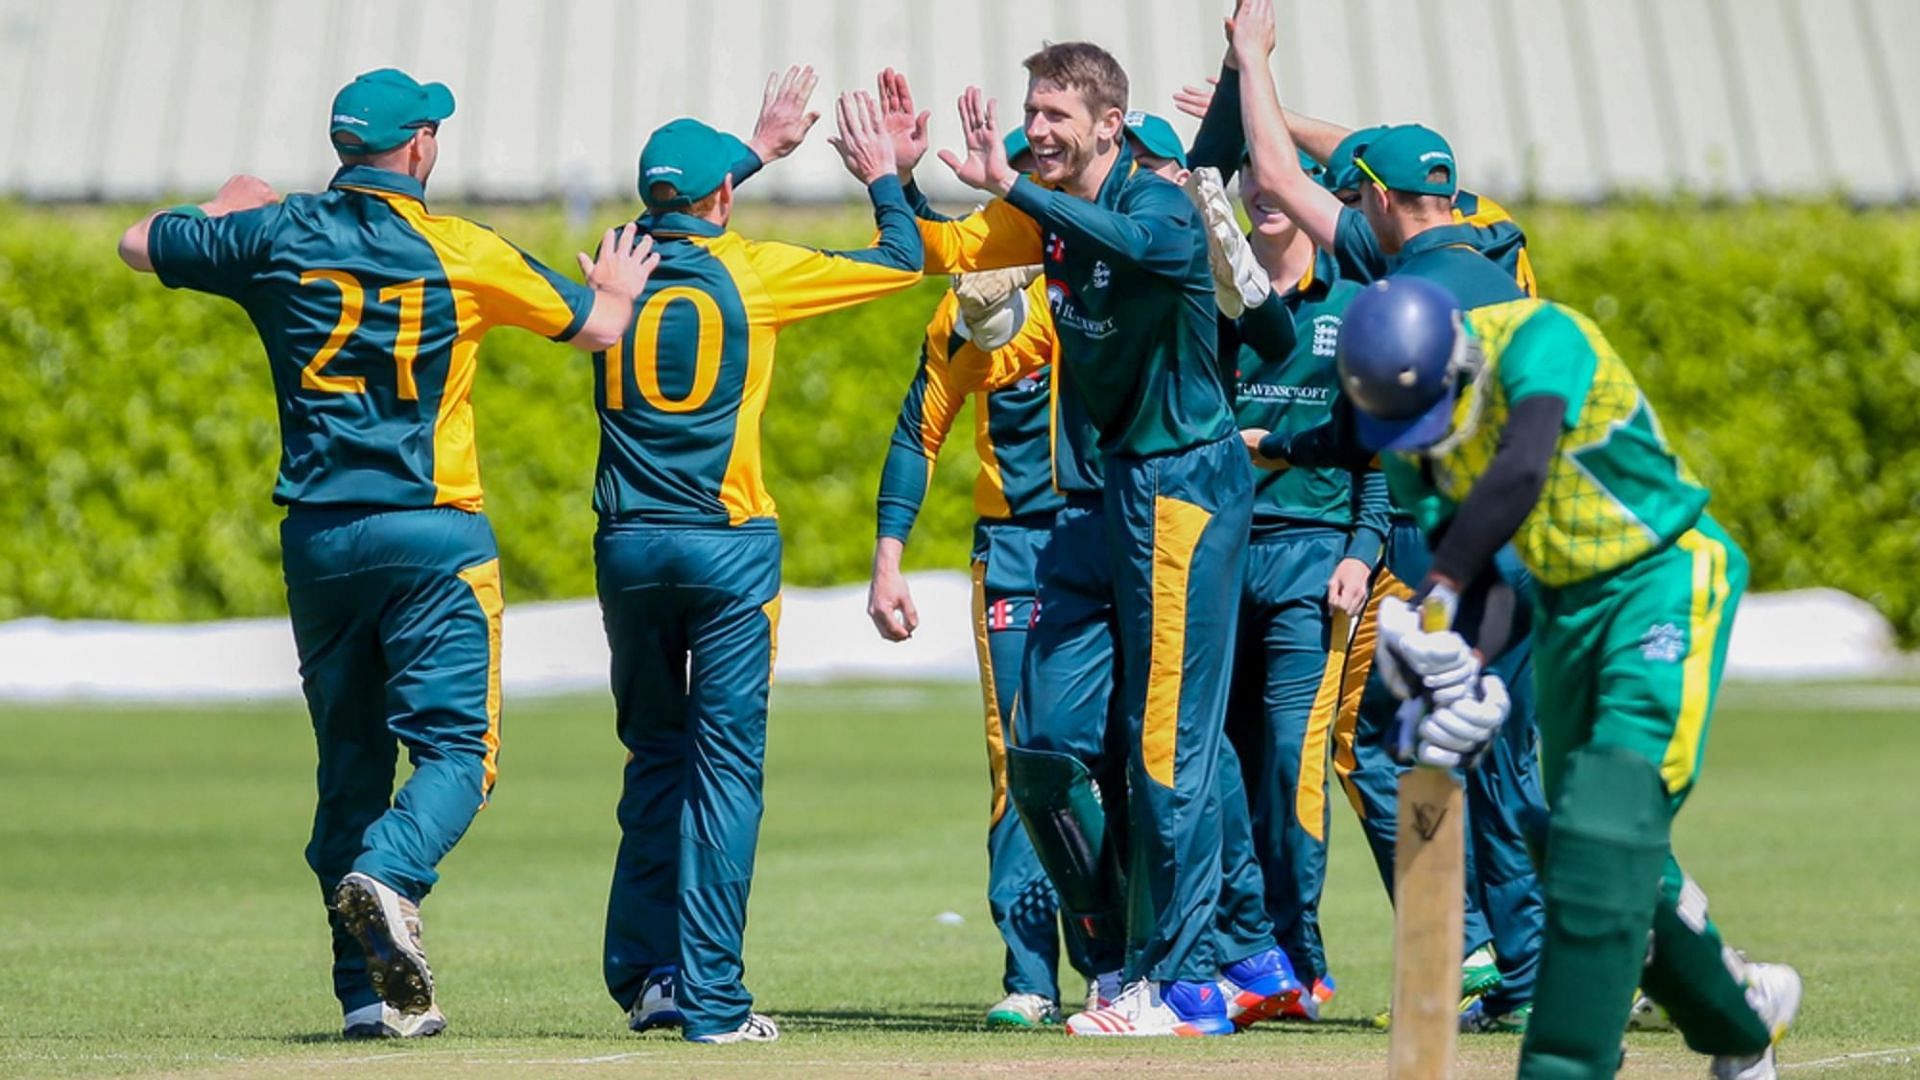 The Guernsey cricket team in action (Image Courtesy: International Cricket Council)